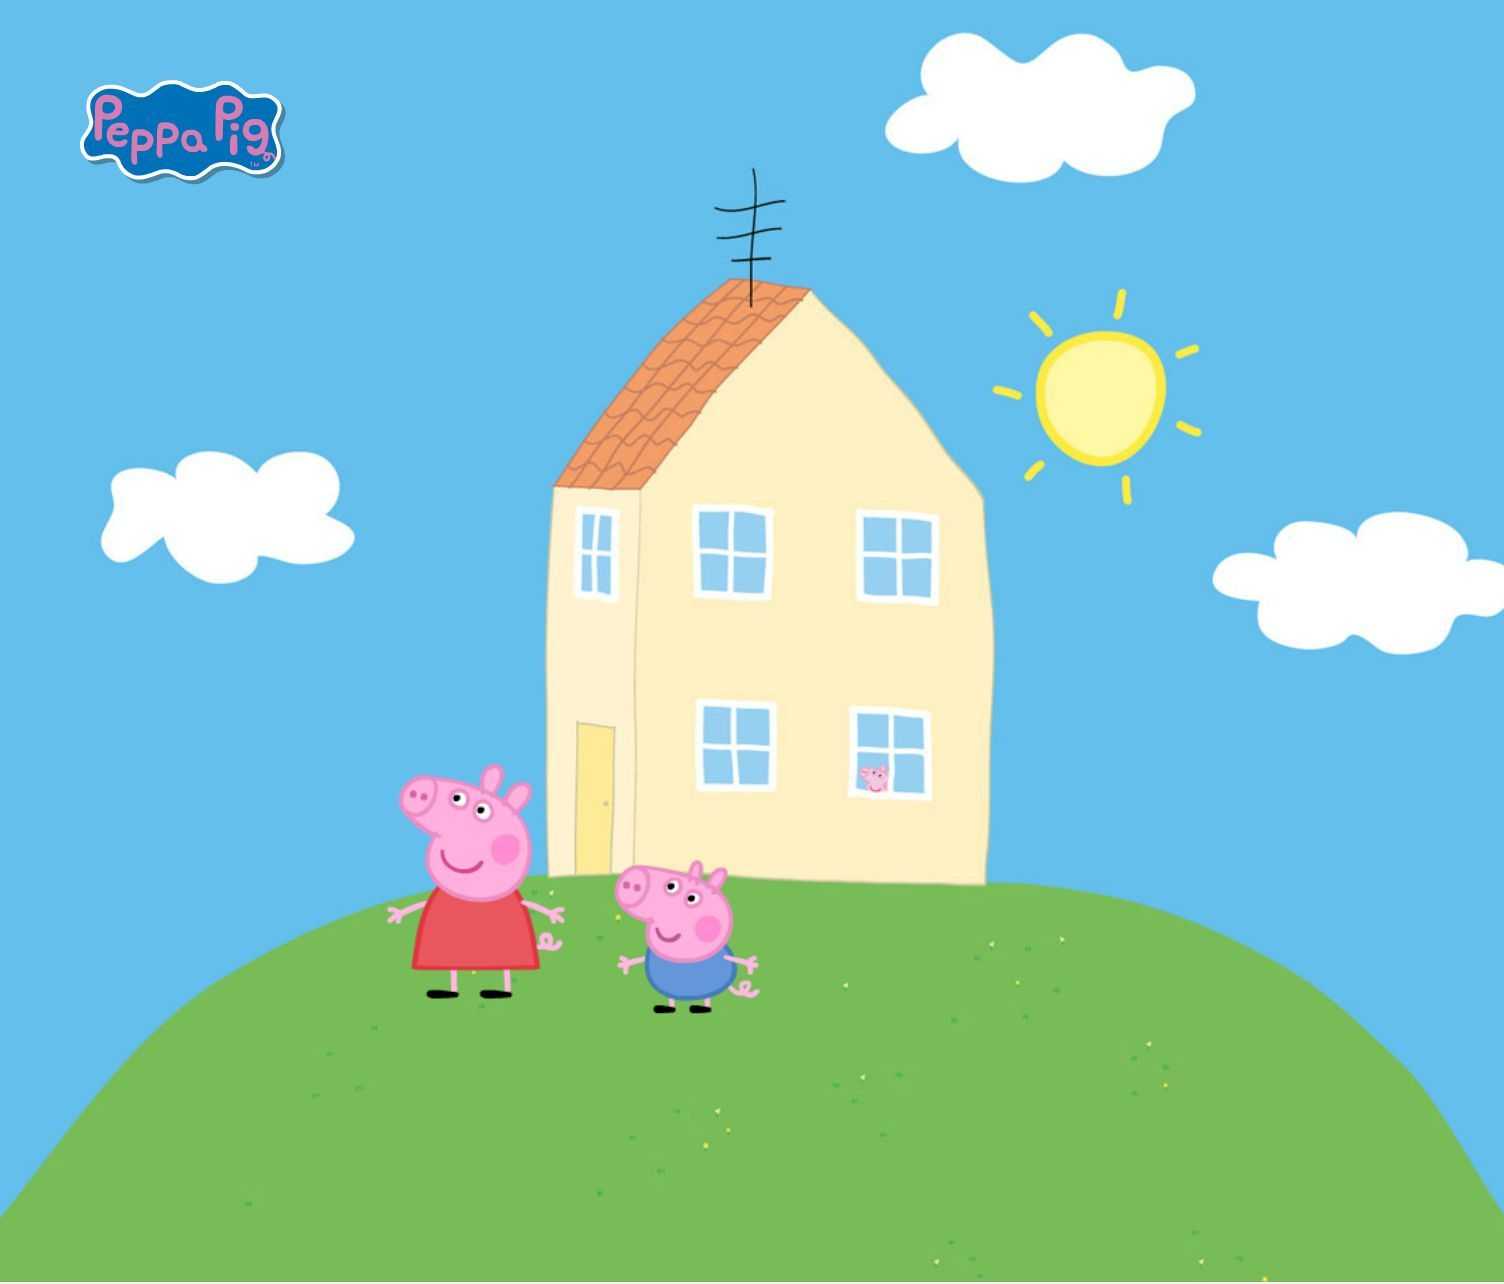 Peppa Pig's House Wallpaper - KoLPaPer - Awesome Free HD Wallpapers